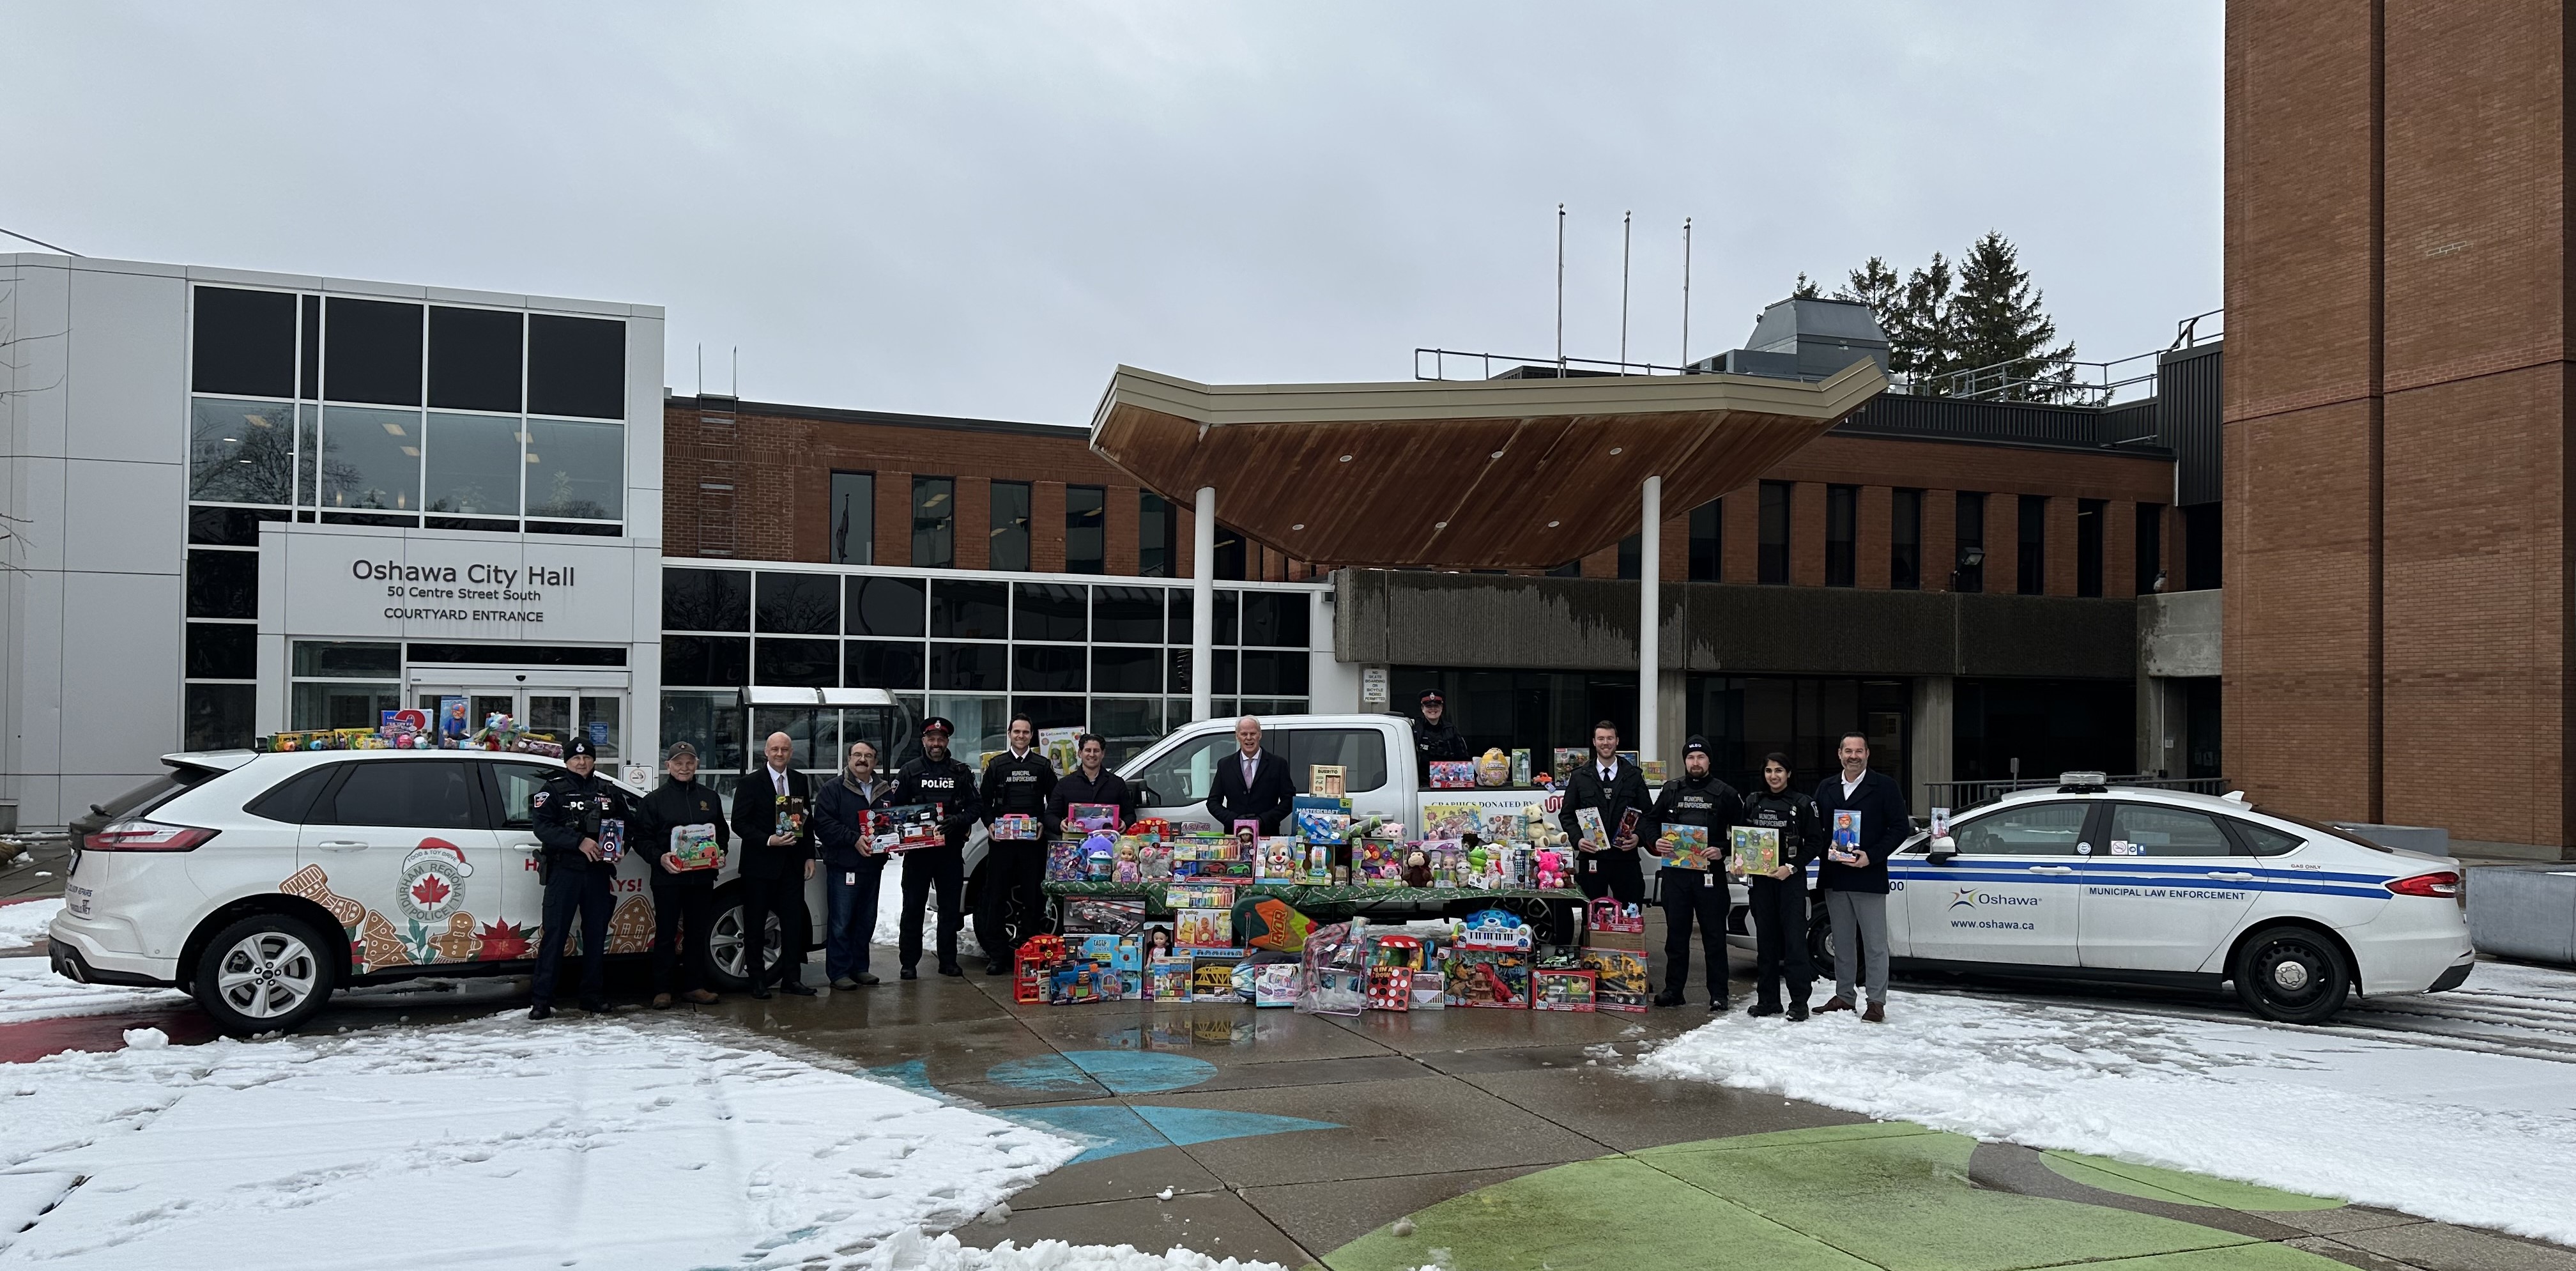 The DRPS Food and Toy Drive visited Oshawa City Hall in December to collect more than $2200 in toys that will be distributed to children and youth in need as part of the DRPS Annual Food and Toy Drive. On hand for the toy collection were members of Council, DRPS Food and Toy Drive volunteers and Municipal Law Enforcement staff. 